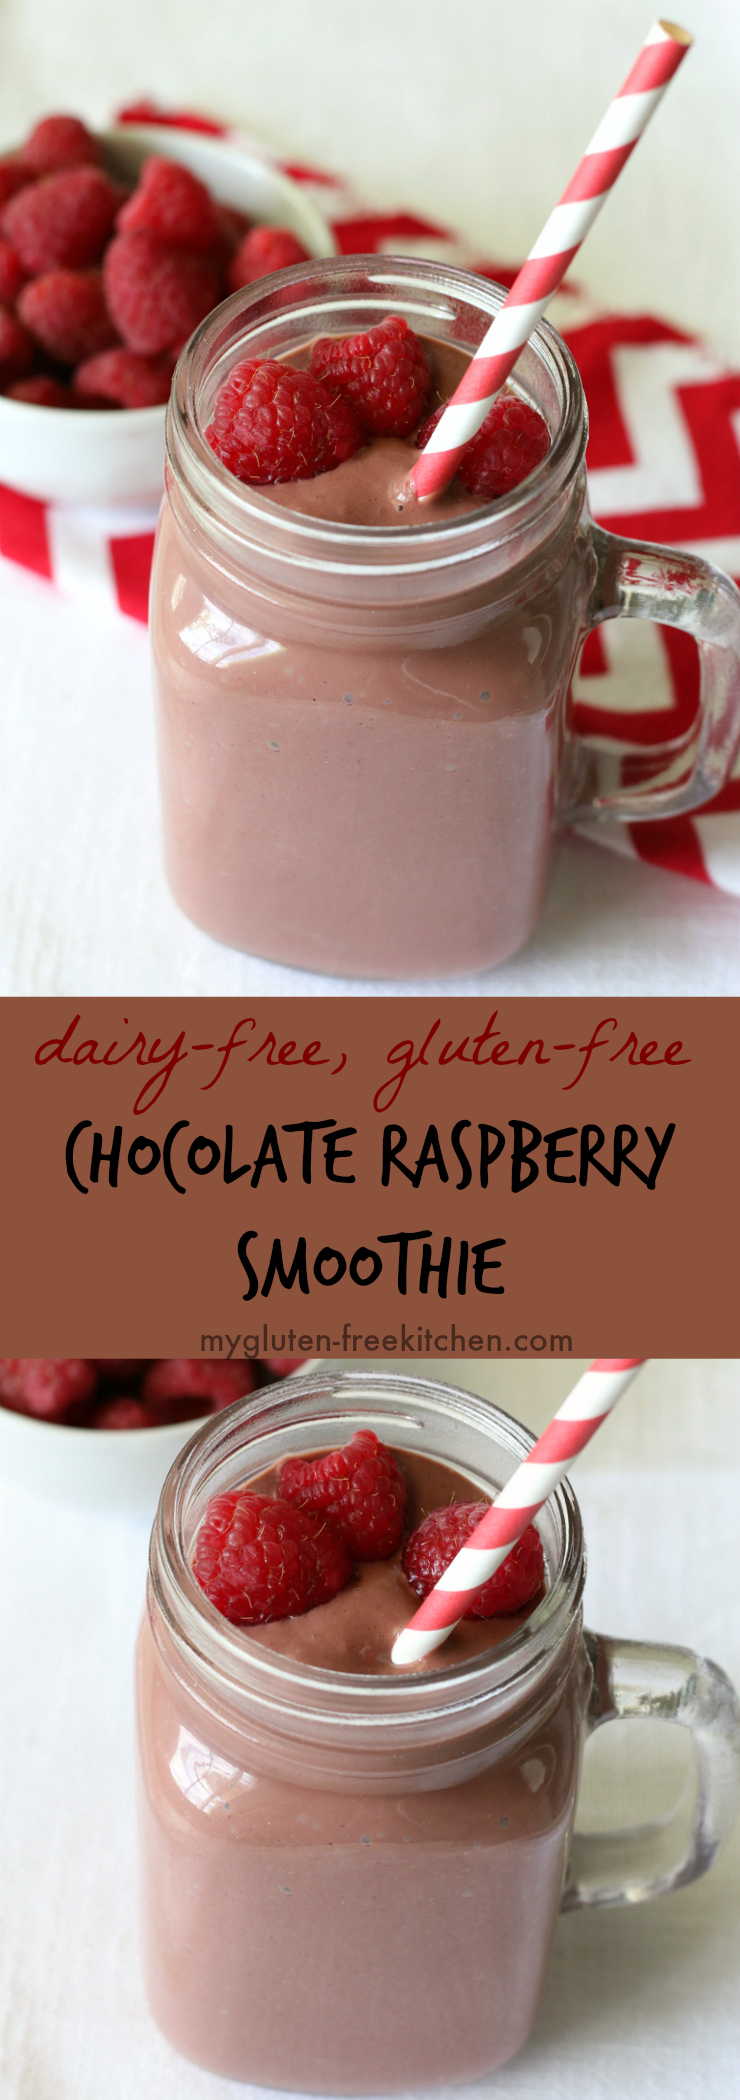 Dairy-free Chocolate Raspberry Smoothie recipe. Easy and delicious gluten-free and dairy-free smoothie recipe.